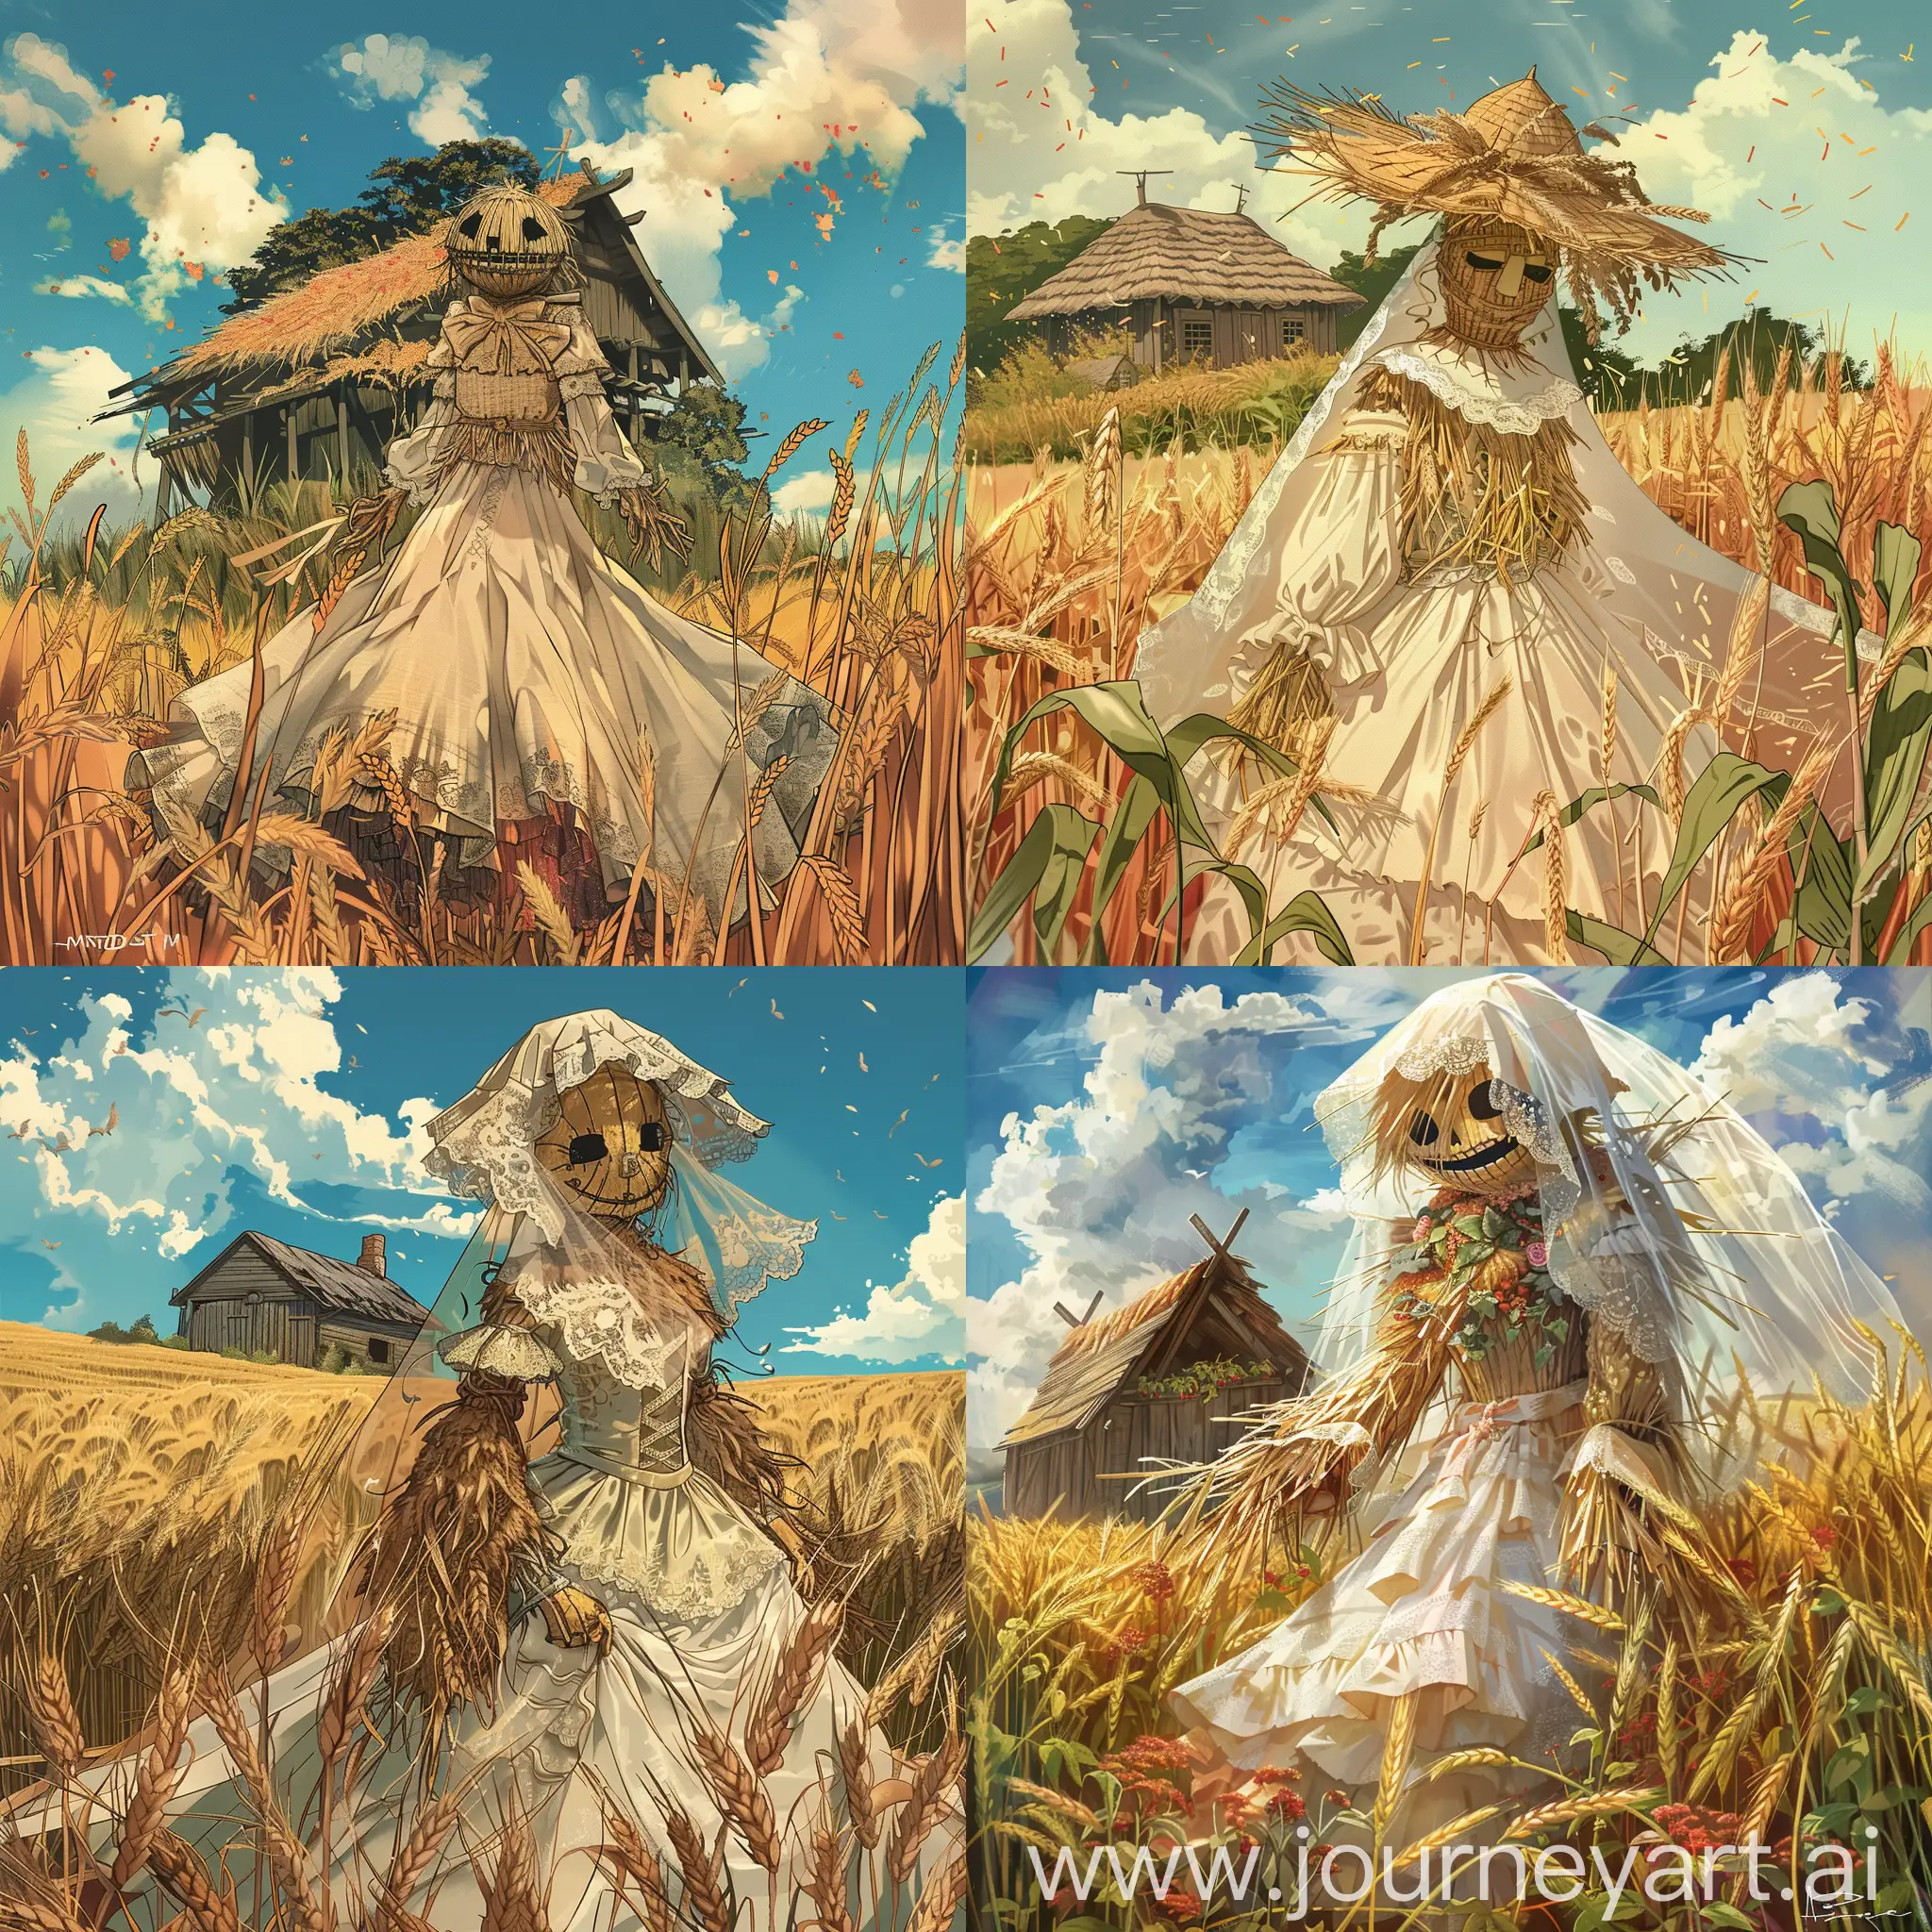 Scarecrow-Wedding-The-Straw-Bride-Storybook-Cover